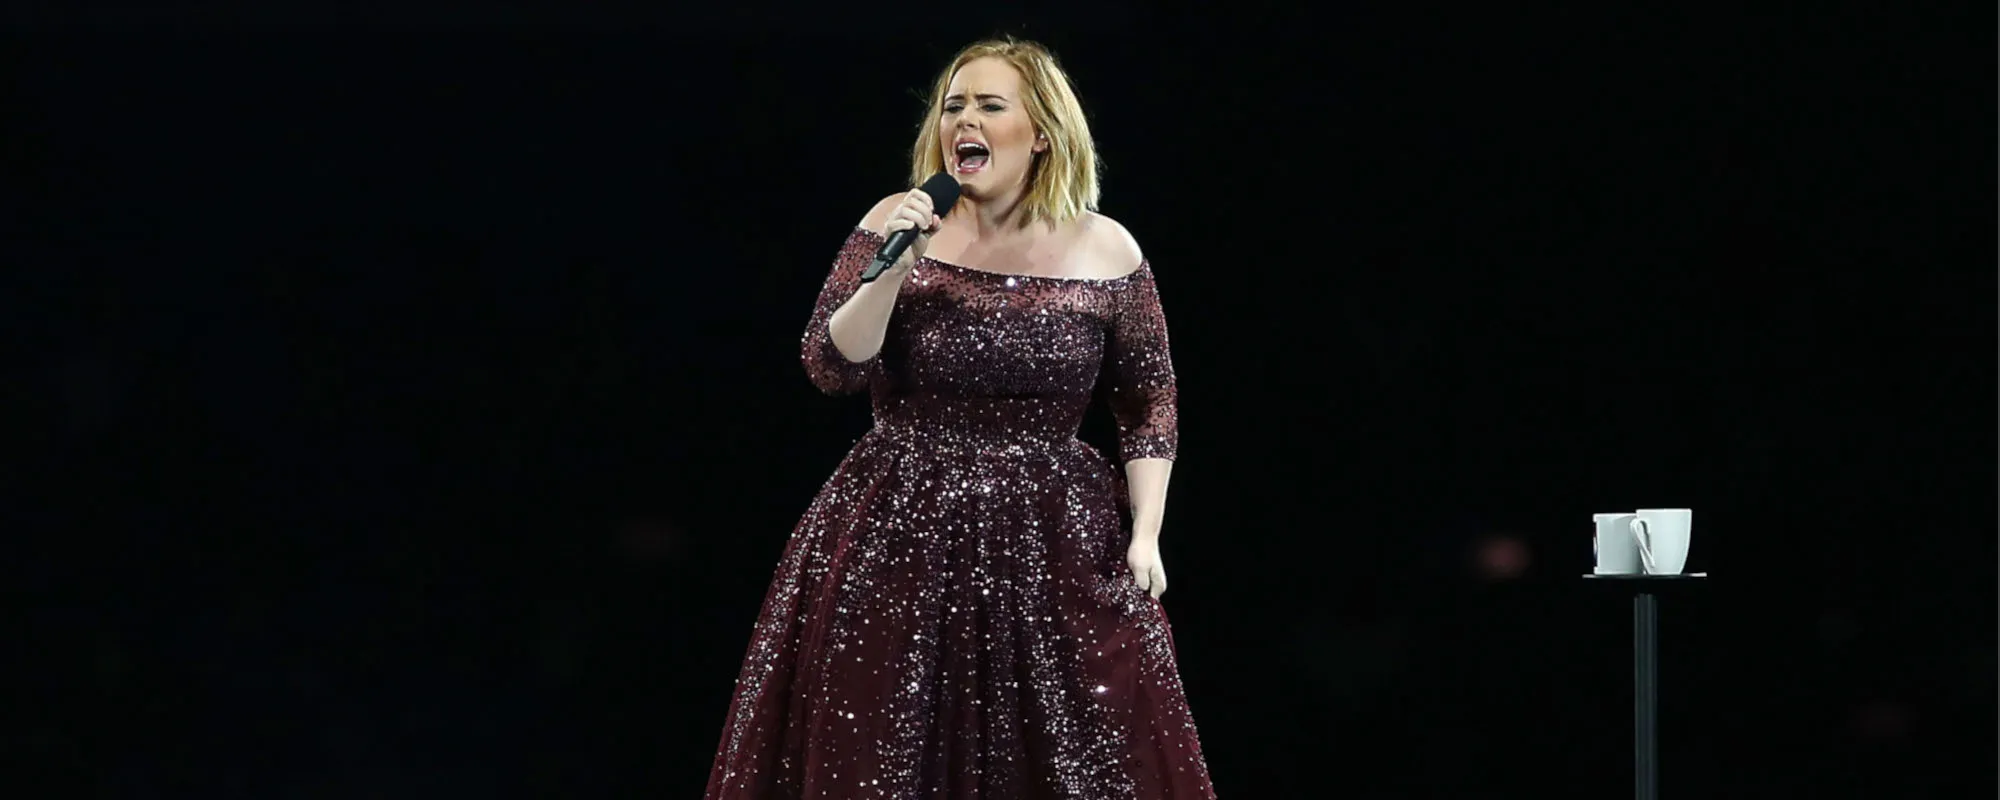 Behind The Song Lyrics: “Hello” by Adele